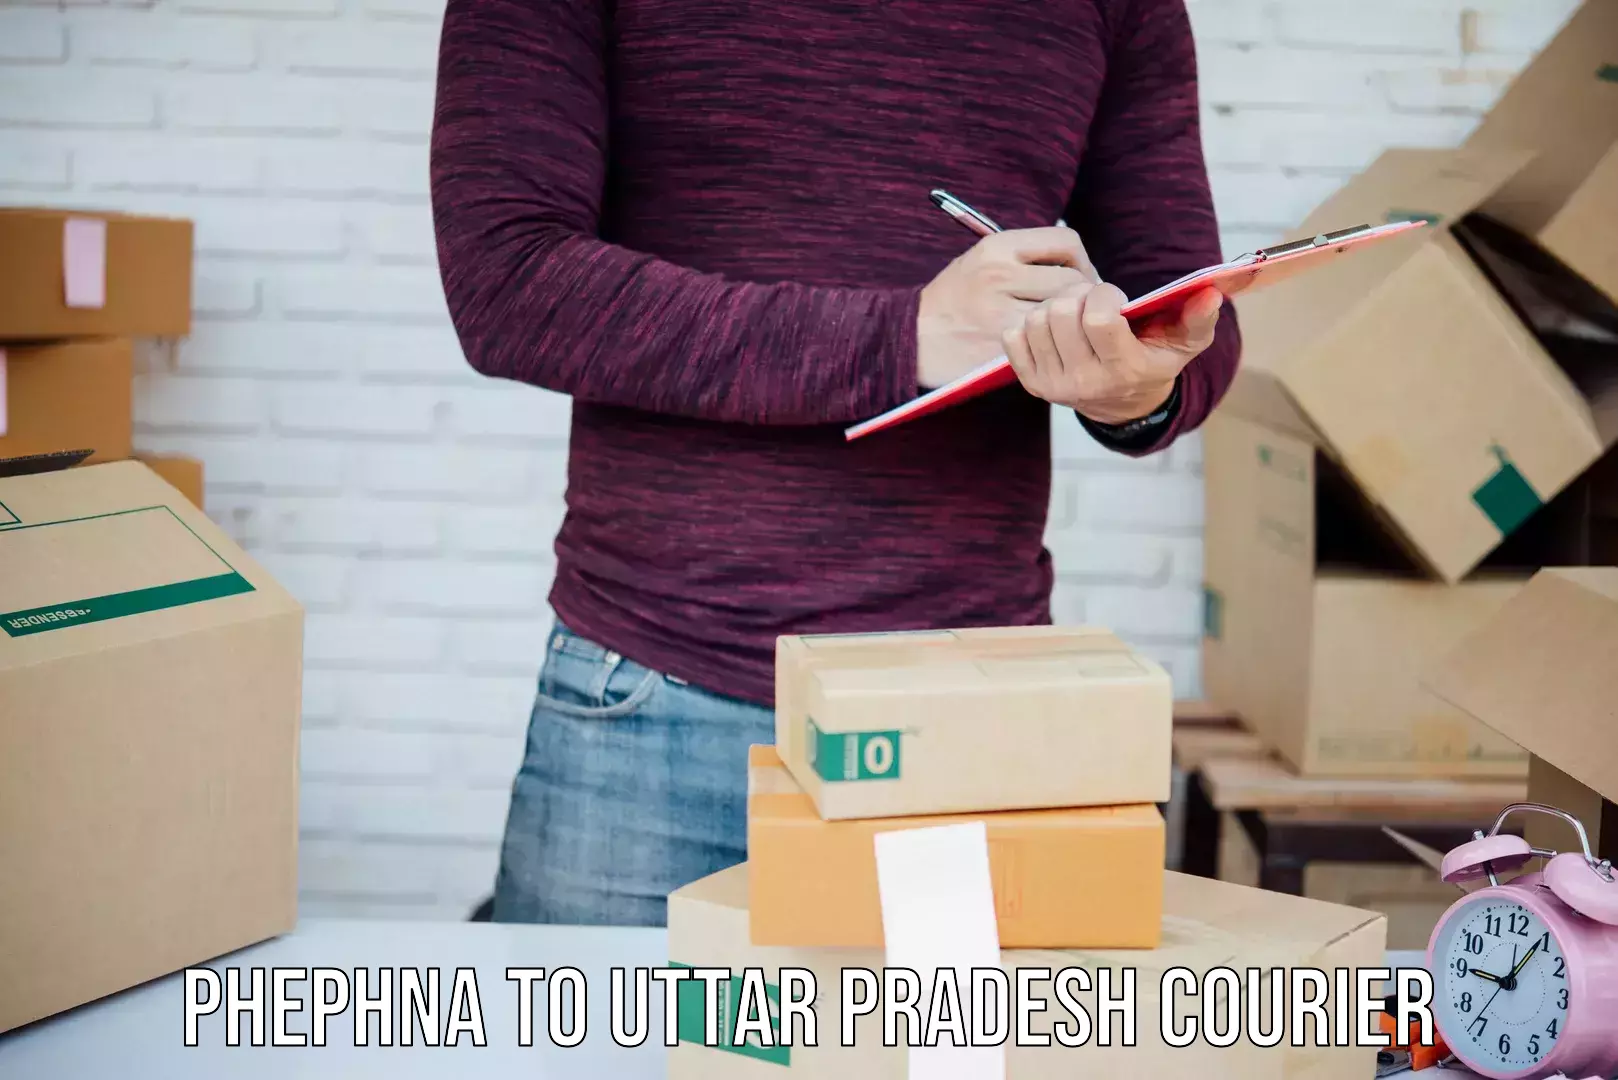 E-commerce fulfillment Phephna to Jiyanpur